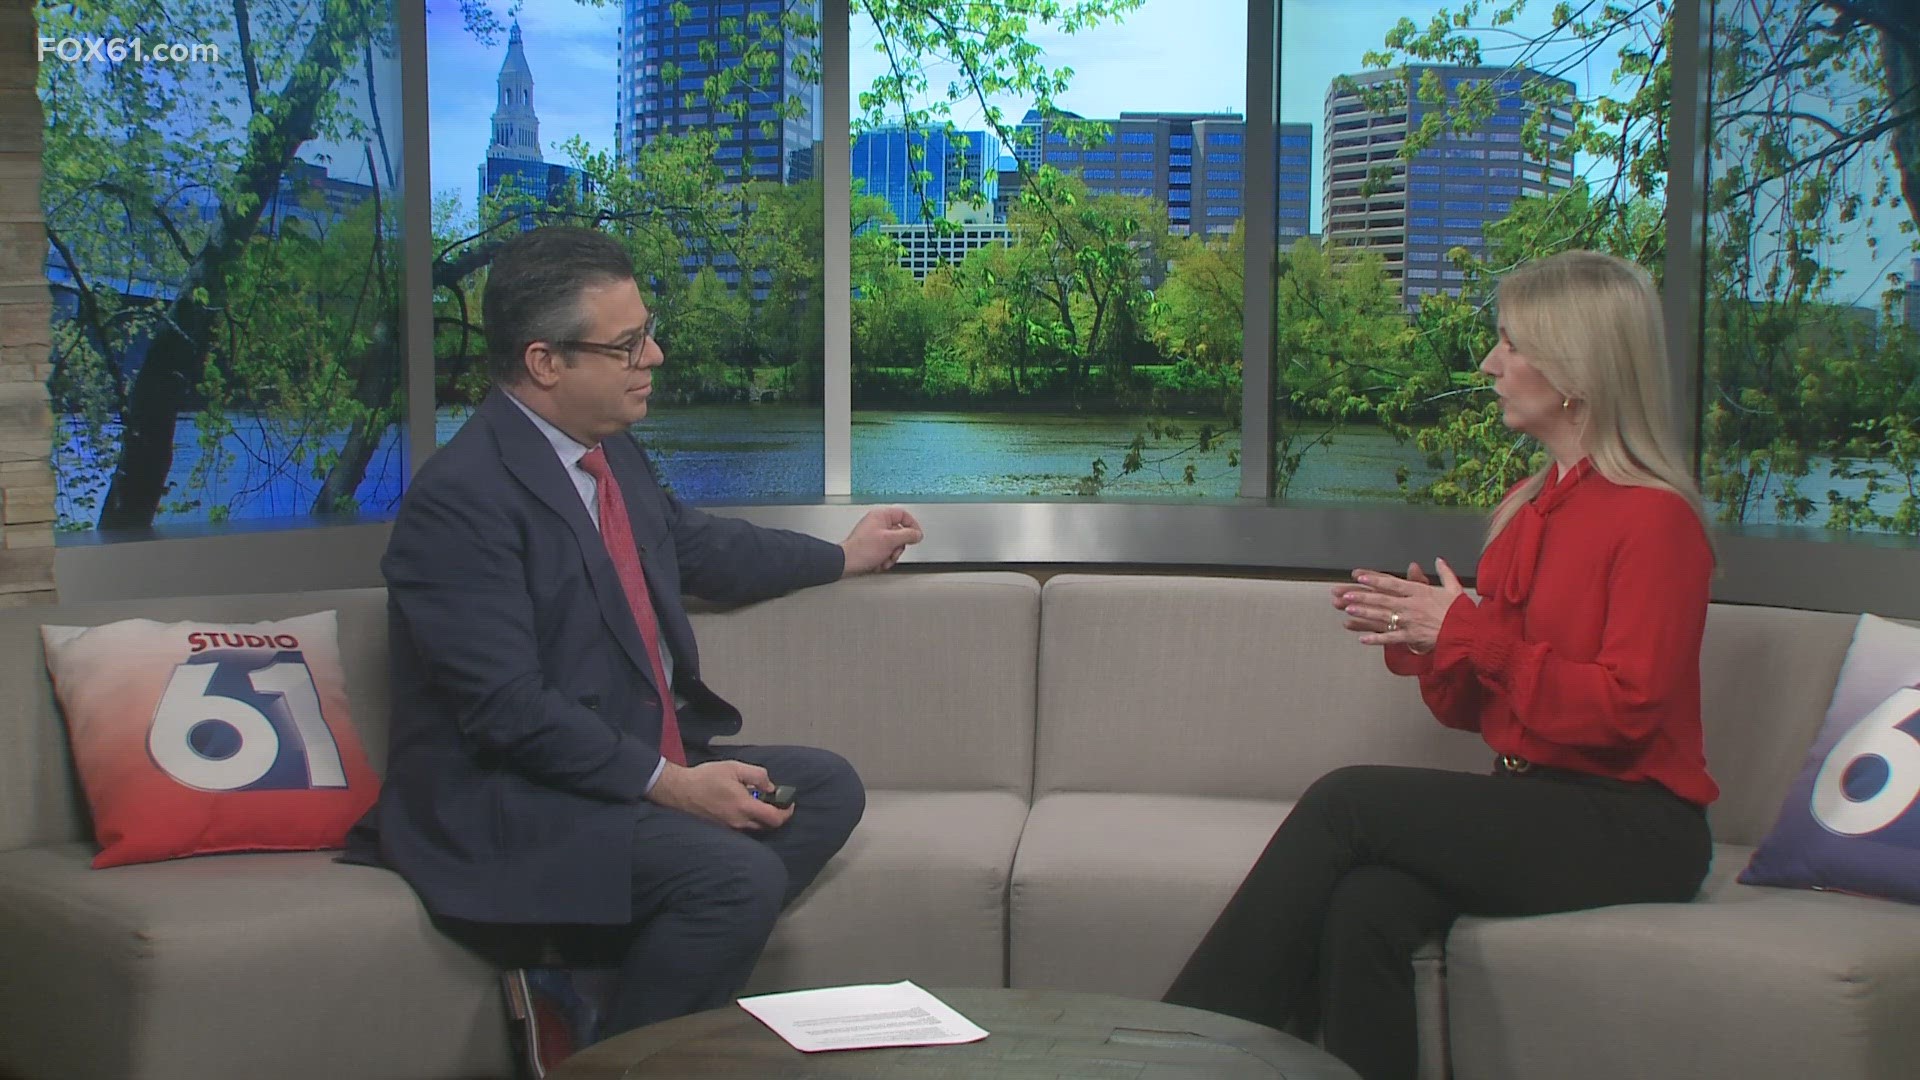 Mary Bailey, regional medical director of Multiple Sclerosis at Trinity Health of New England, explains what MS is and how it affects the immune system.